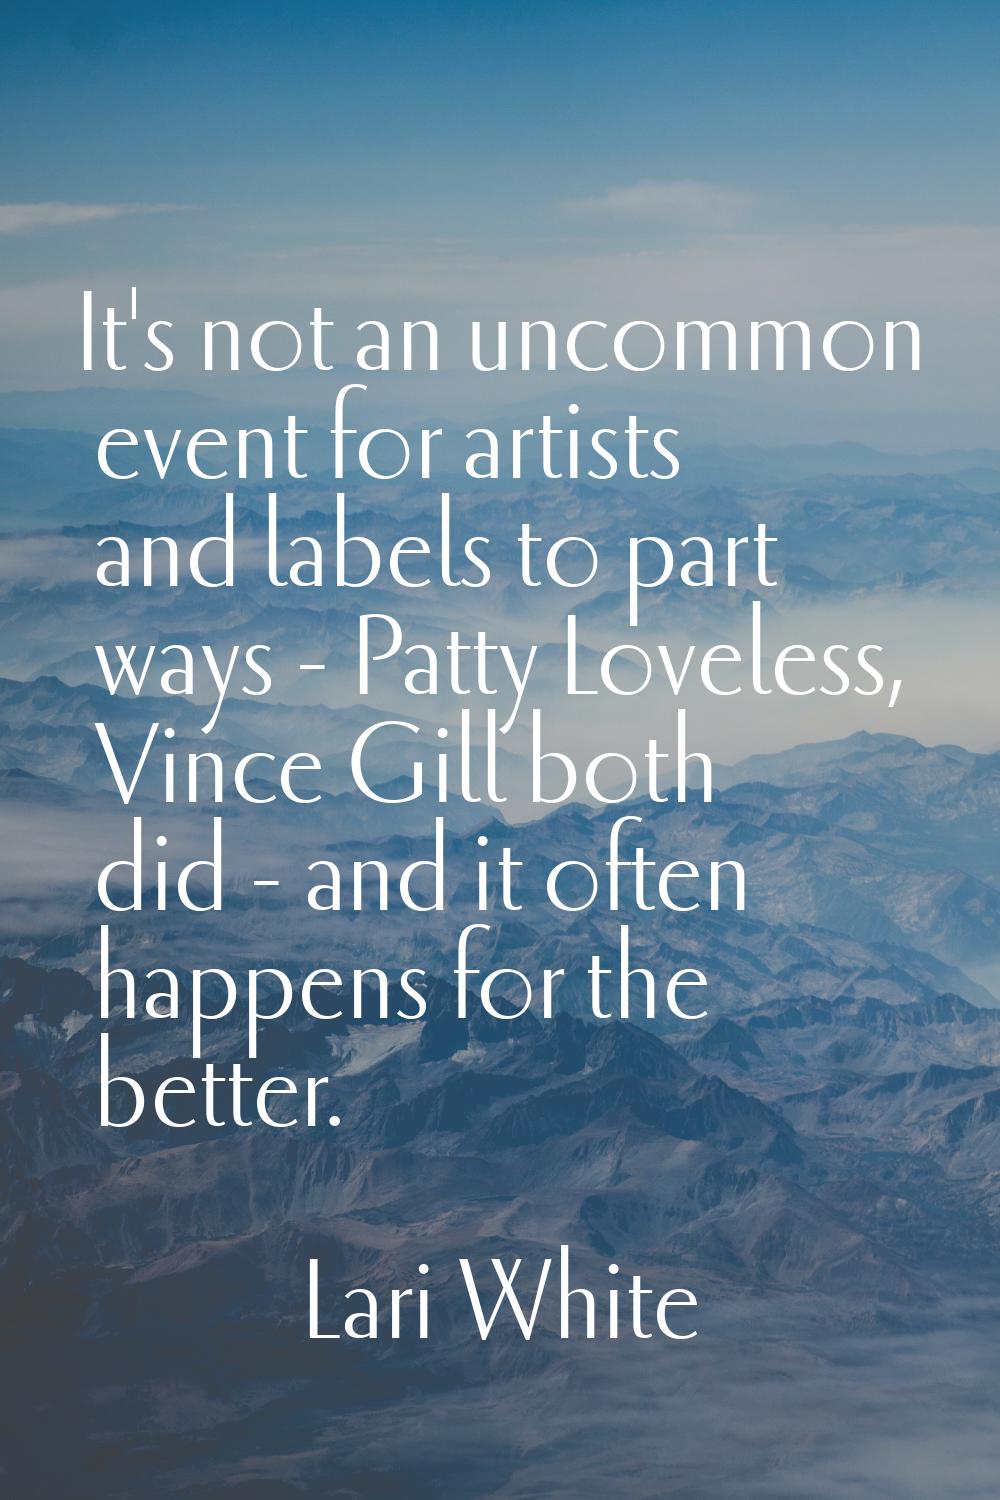 It's not an uncommon event for artists and labels to part ways - Patty Loveless, Vince Gill both di